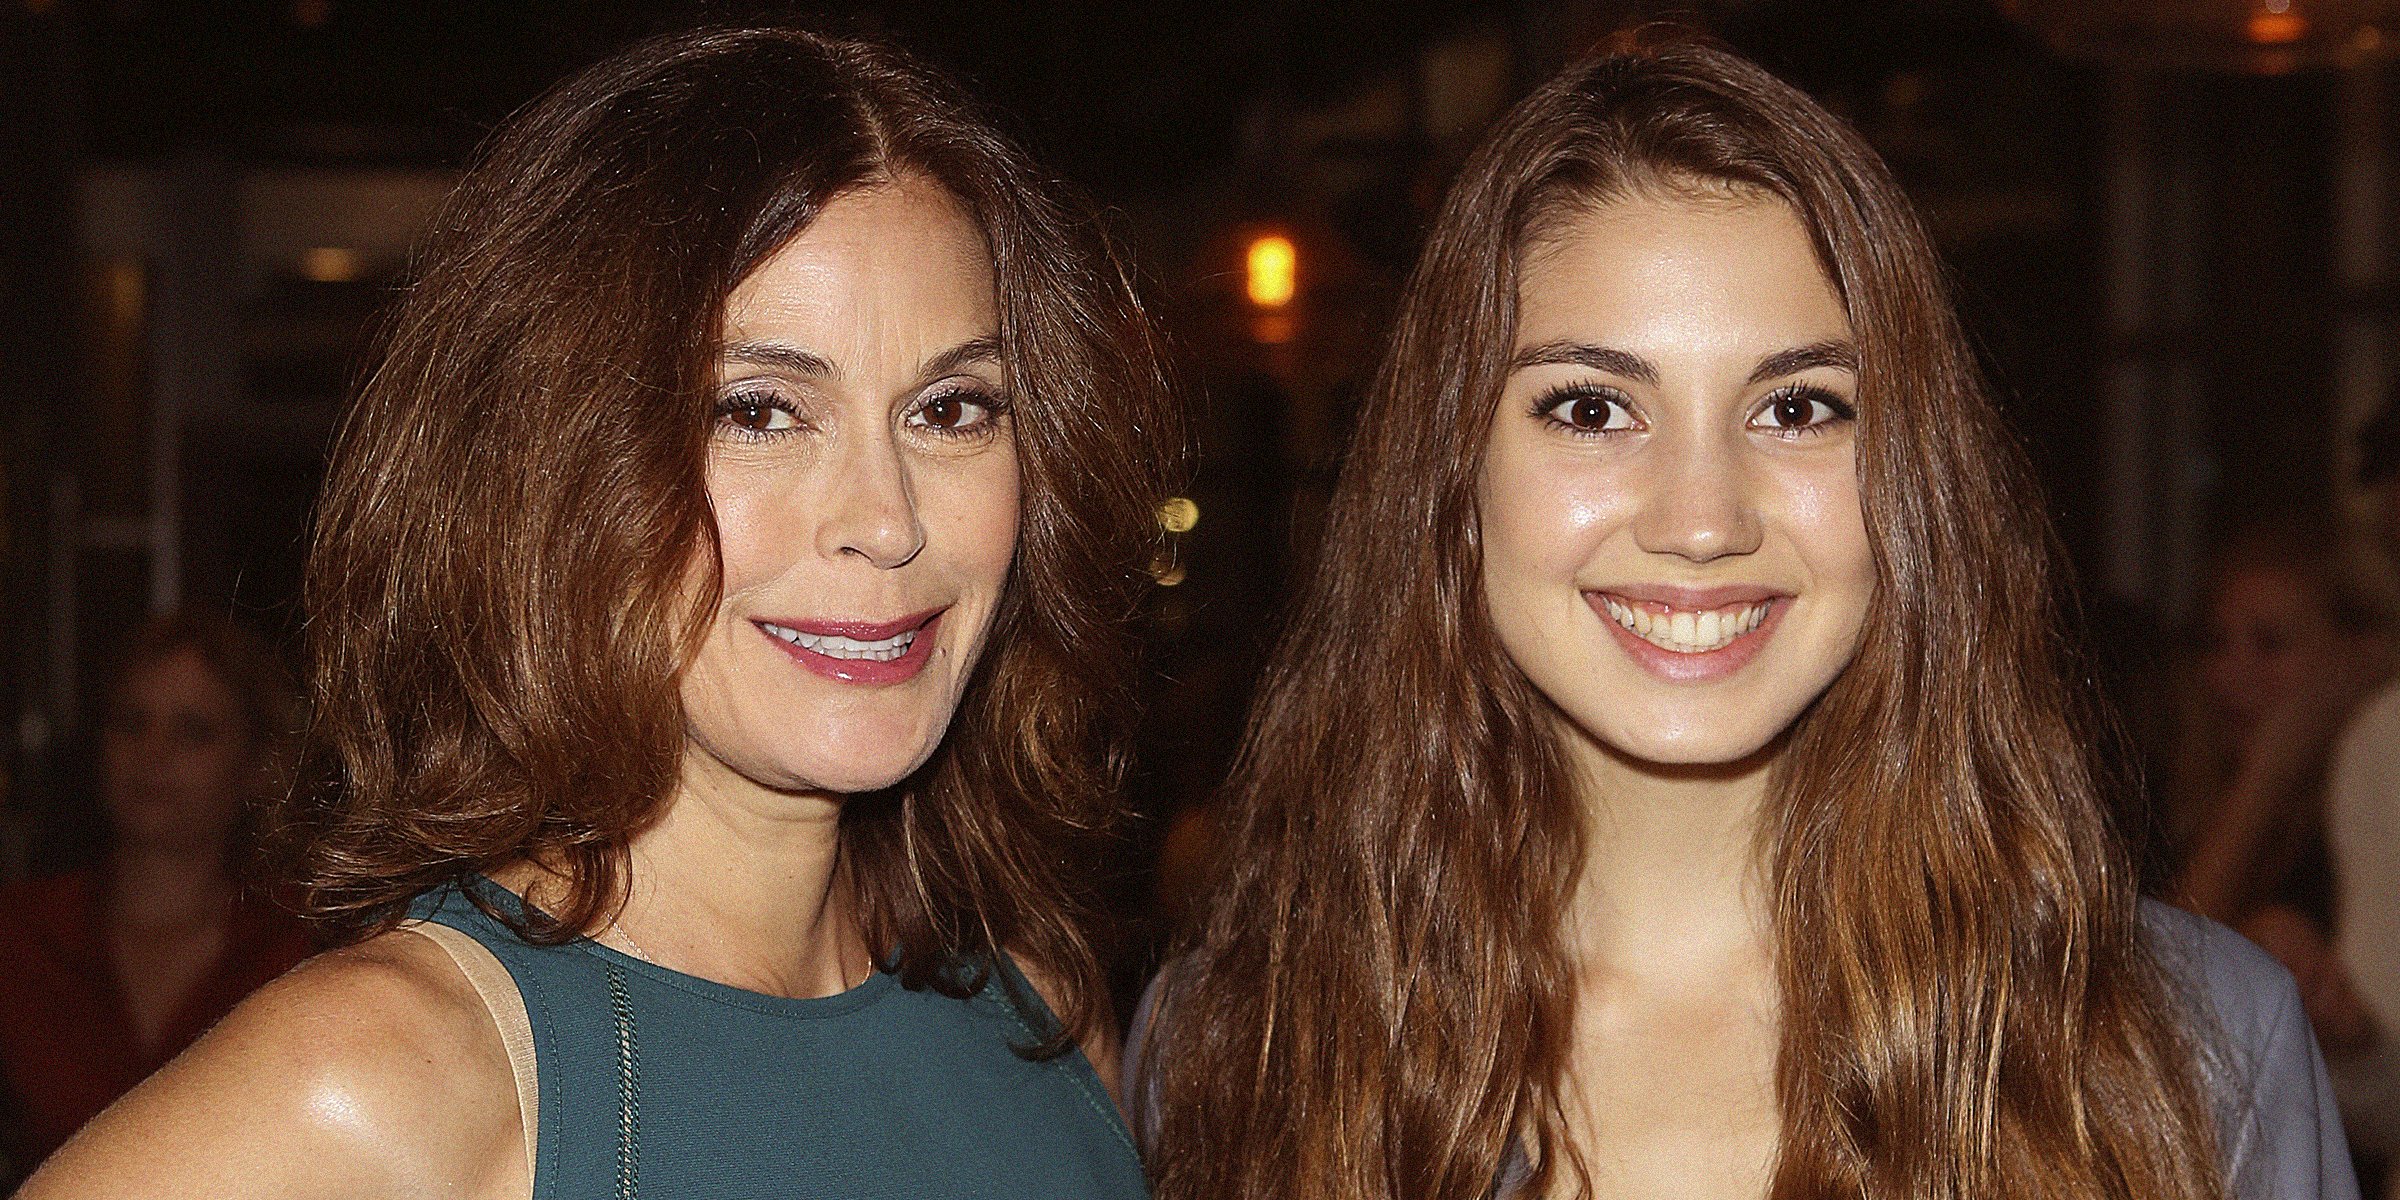 Teri Hatcher and Emerson Tenney | Source: Getty Images